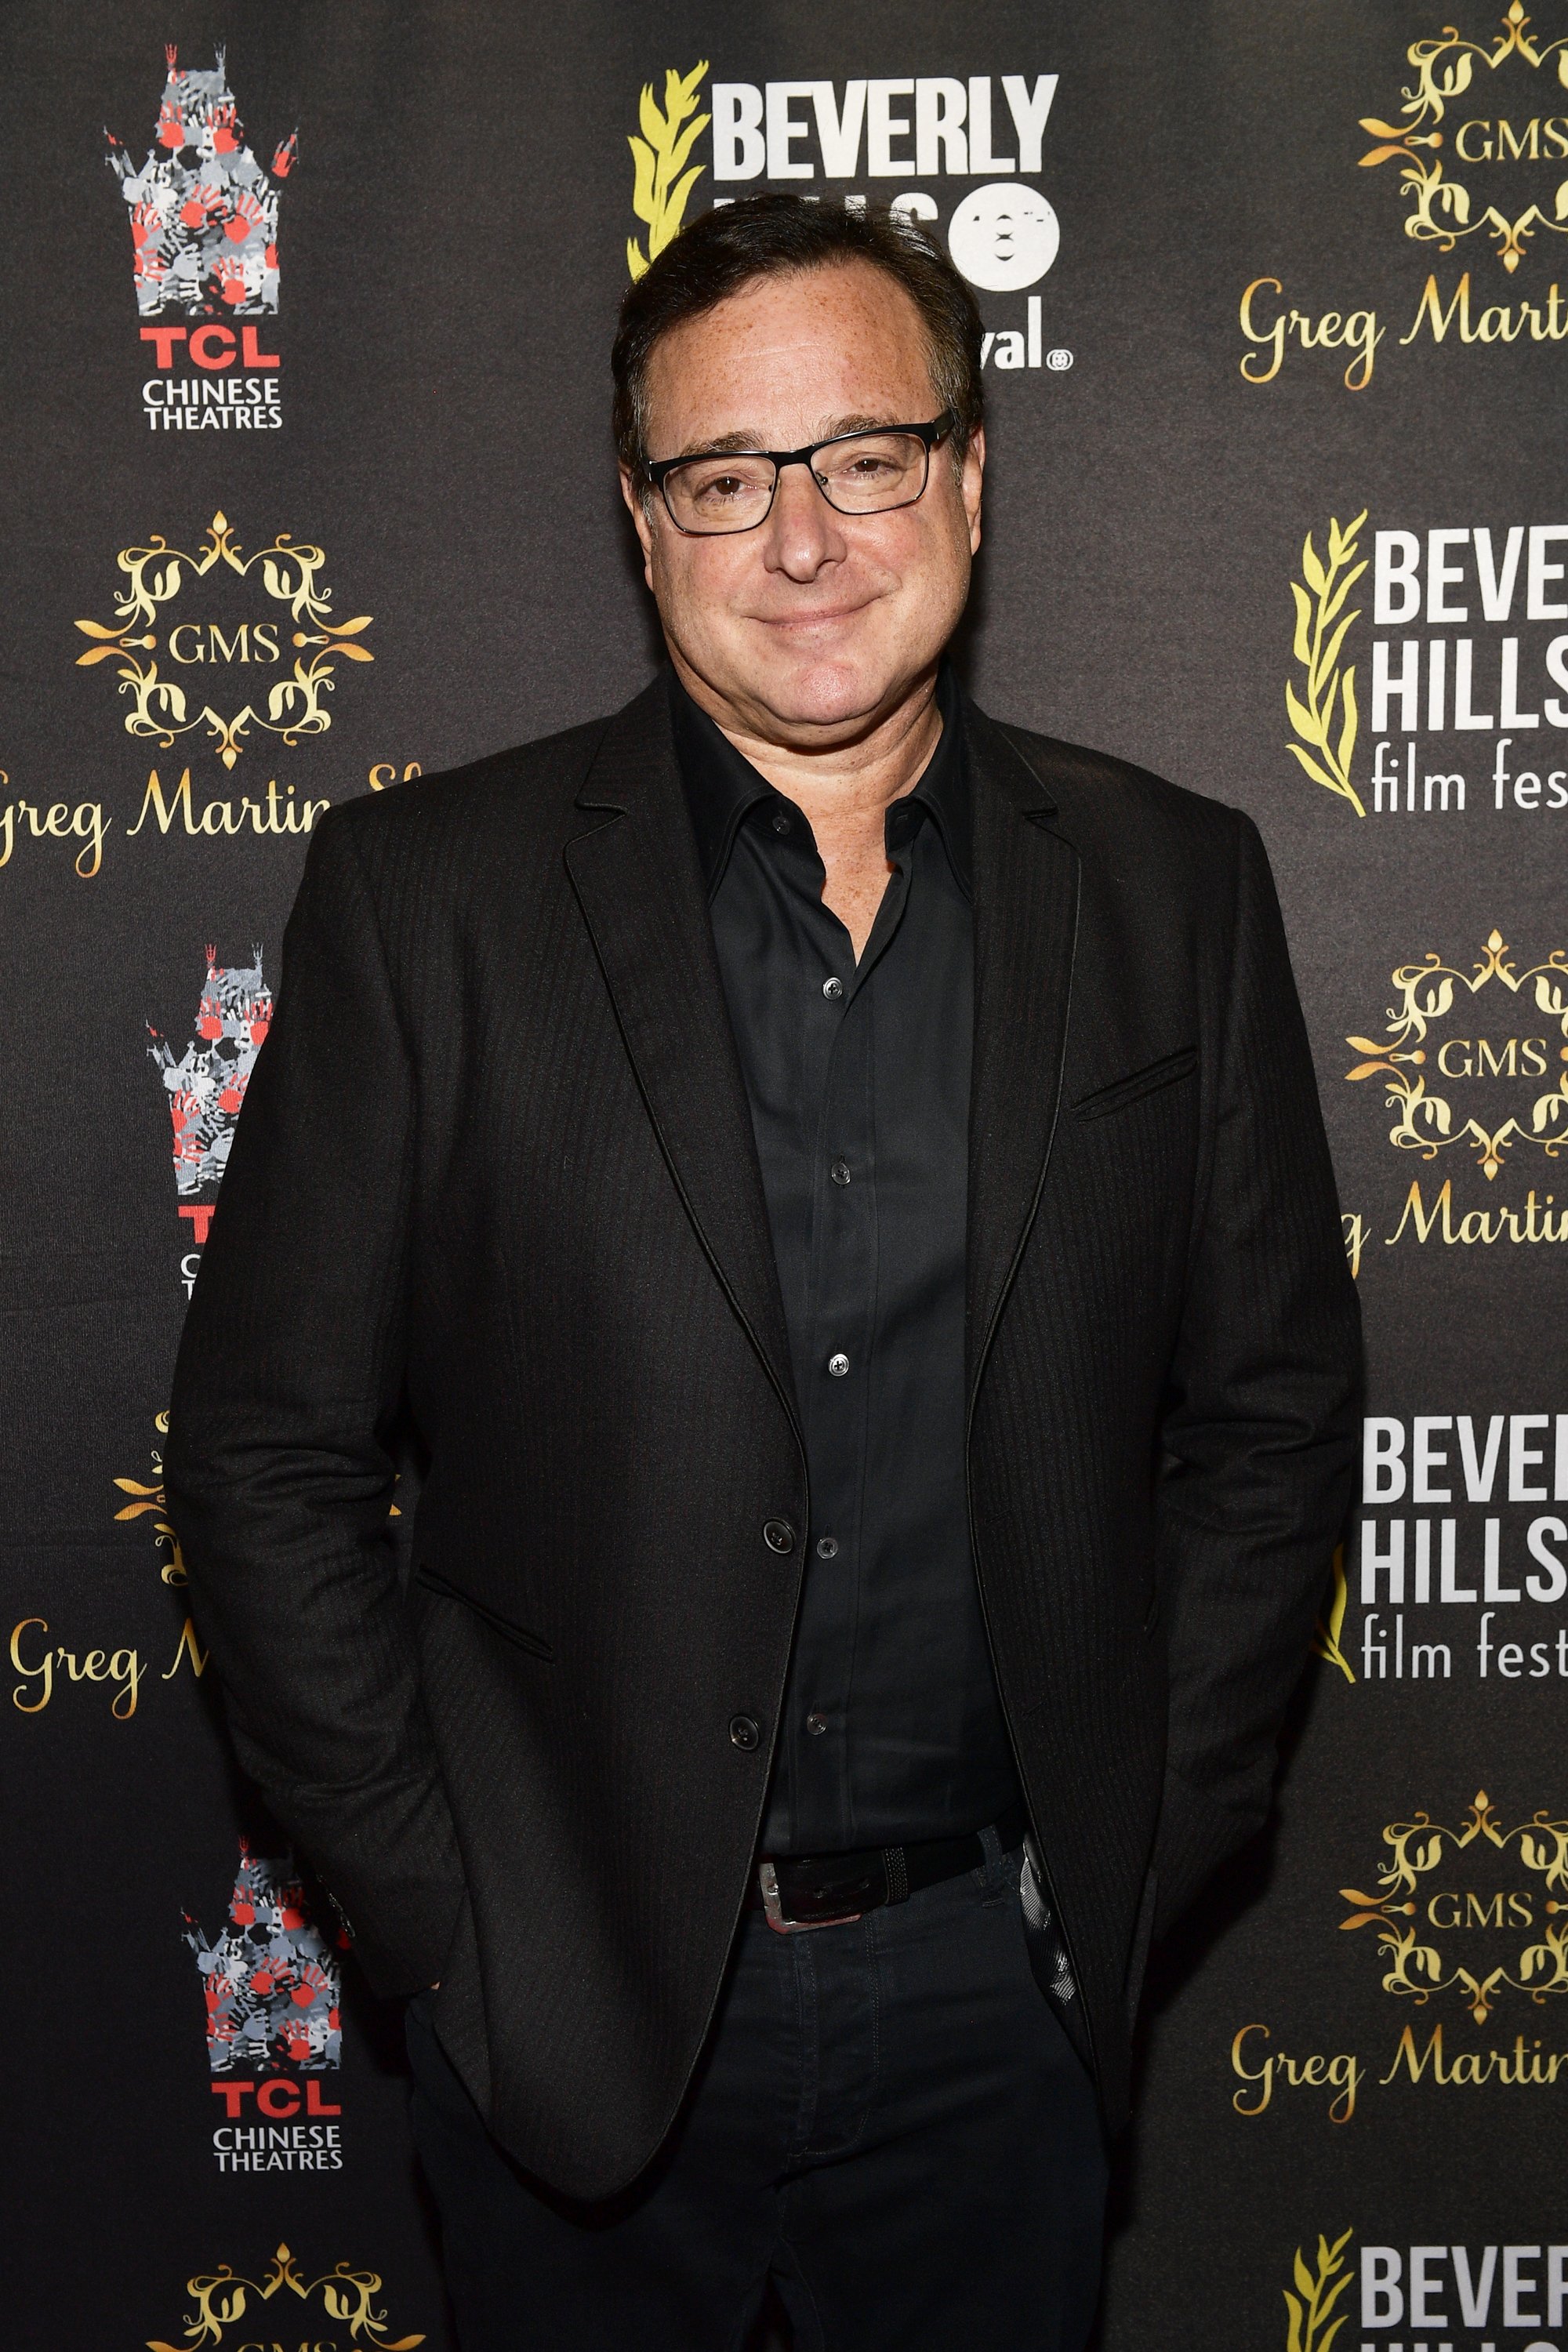 Bob Saget attends the 18th Annual International Beverly Hills Film Festival Opening Night Gala Premiere of "Benjamin" at TCL Chinese 6 Theatres on April 4, 2018 in Hollywood, California. | Source: Getty Images